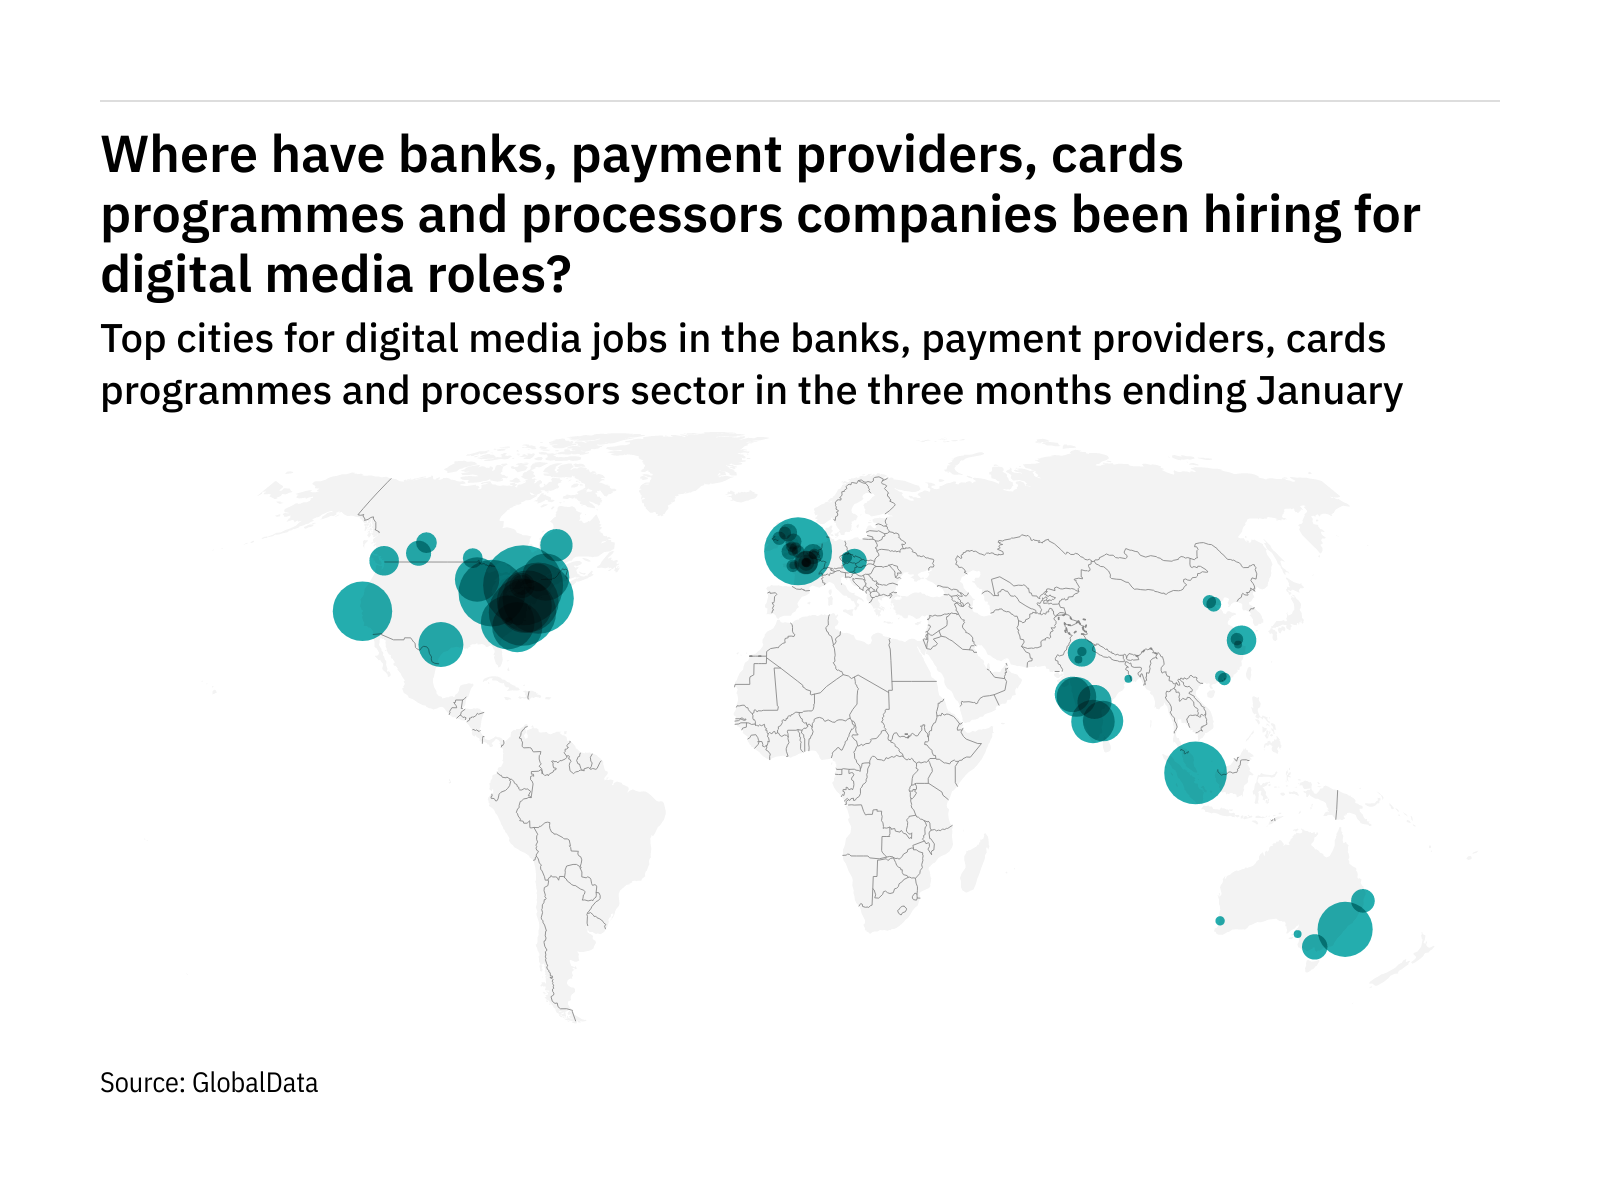 North America is seeing a hiring boom in payment industry digital media roles